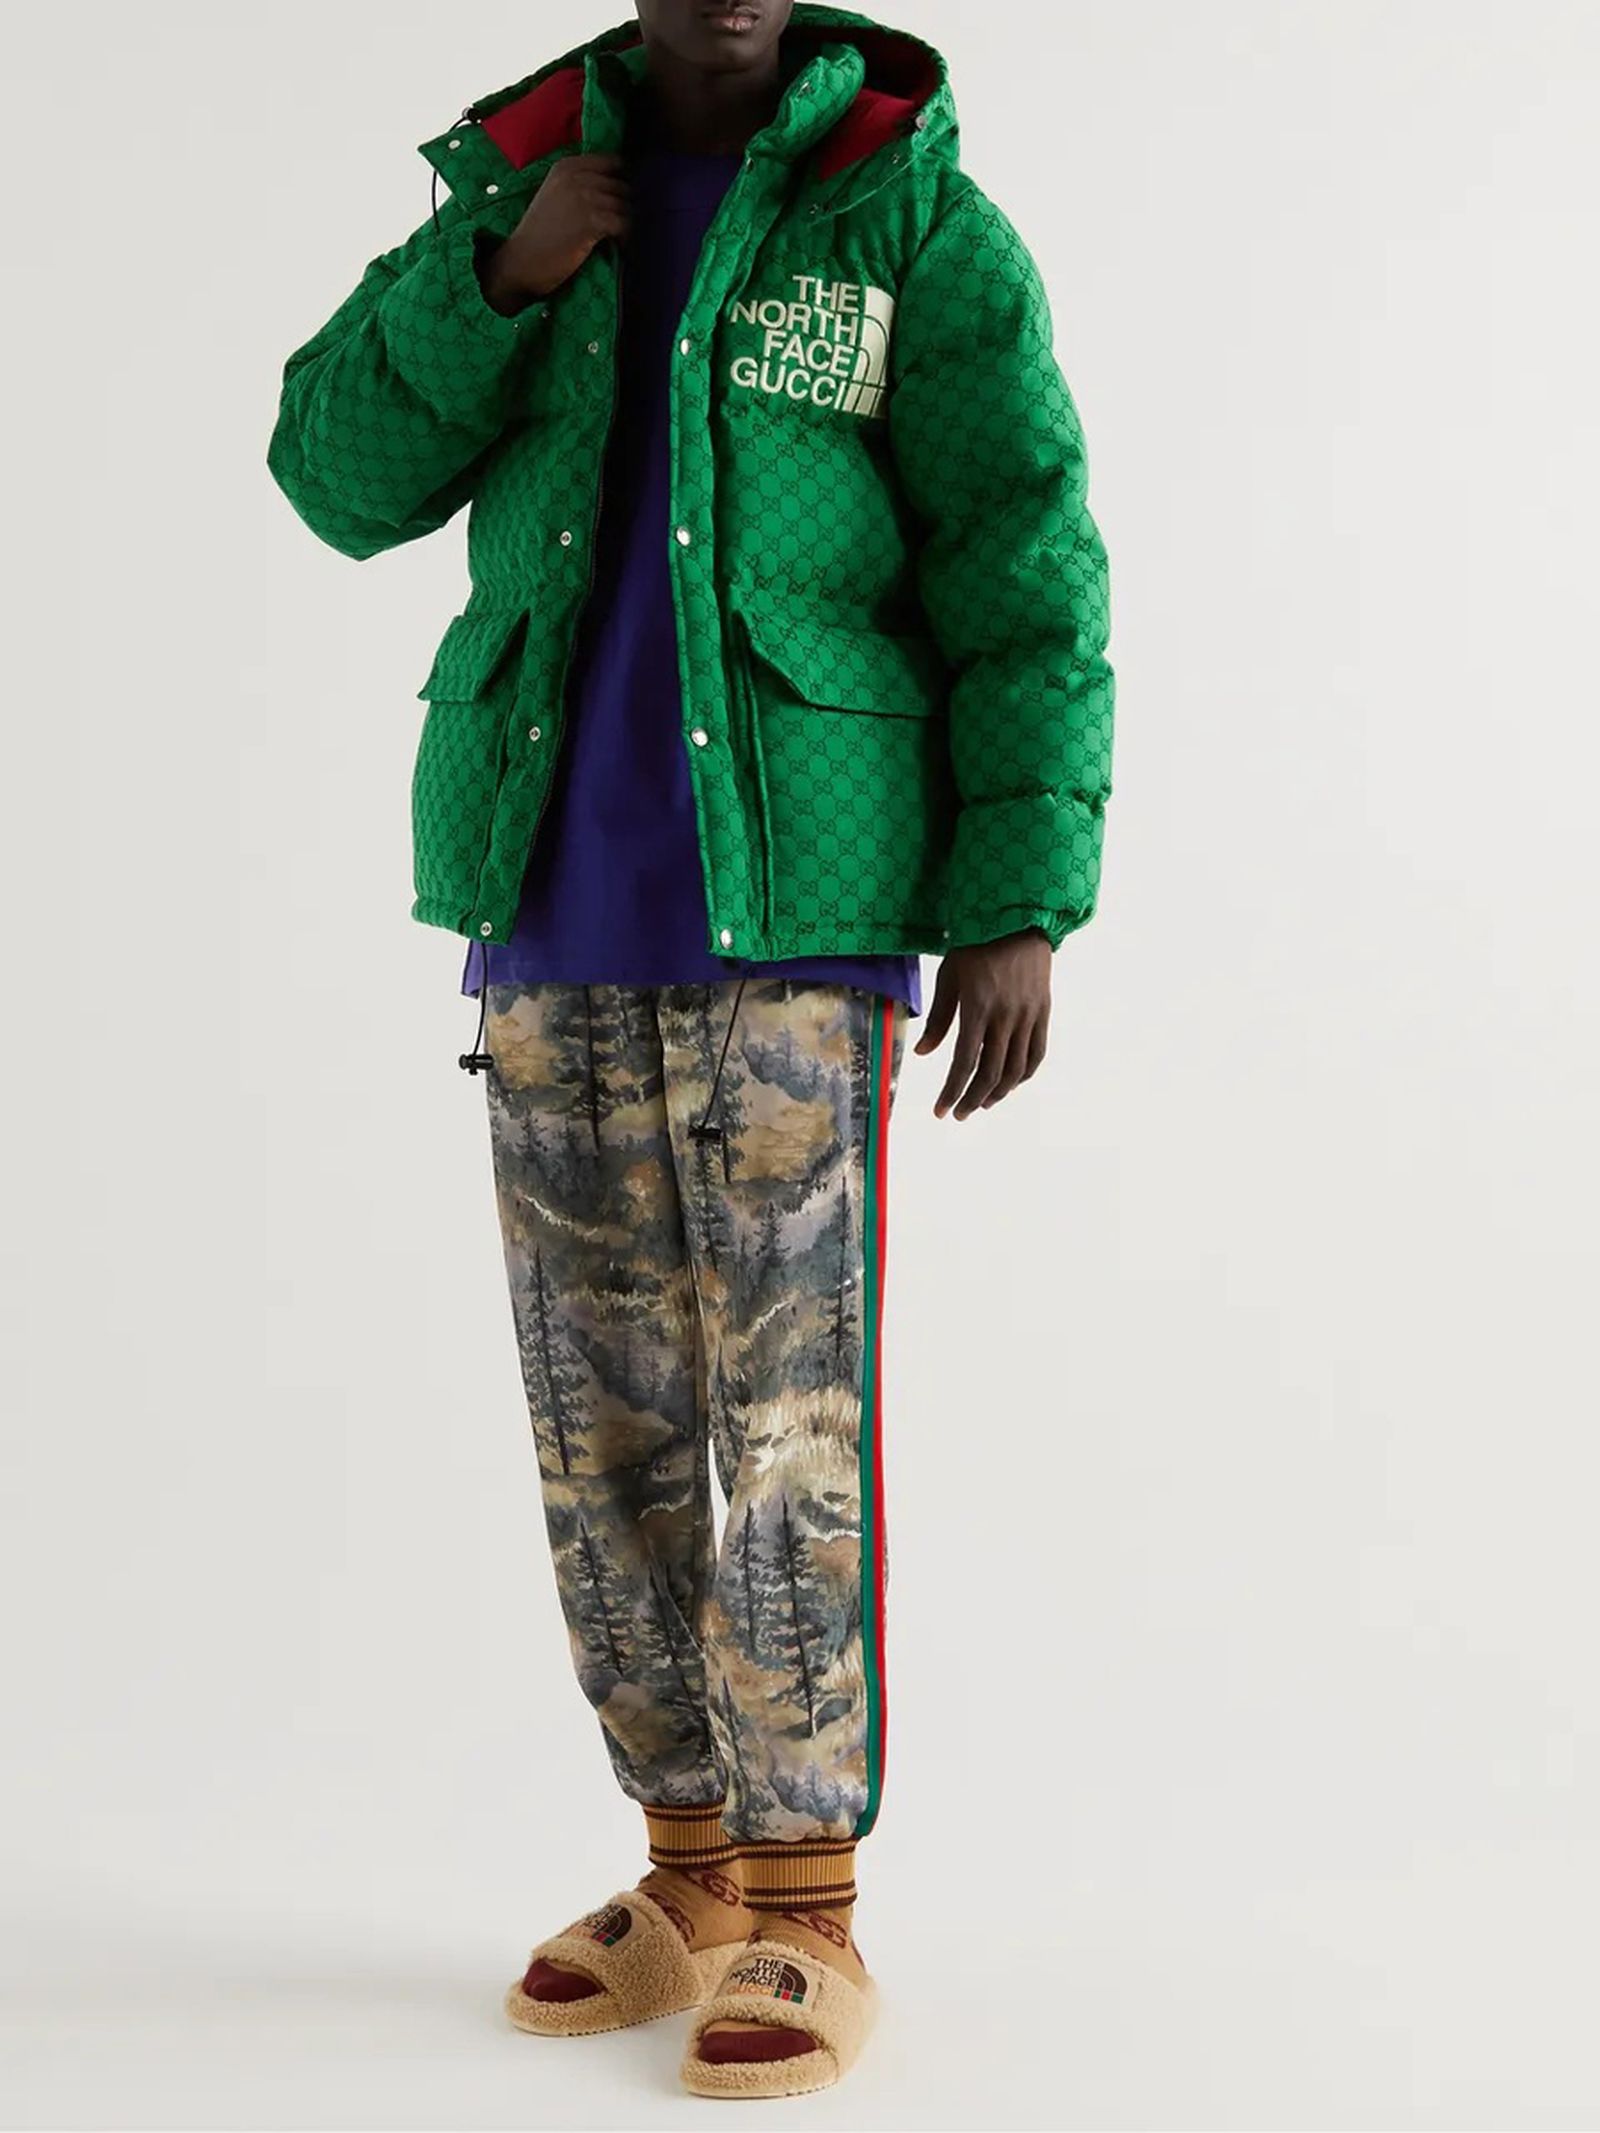 Gucci & North Face Full FW21 Collaboration: to Buy